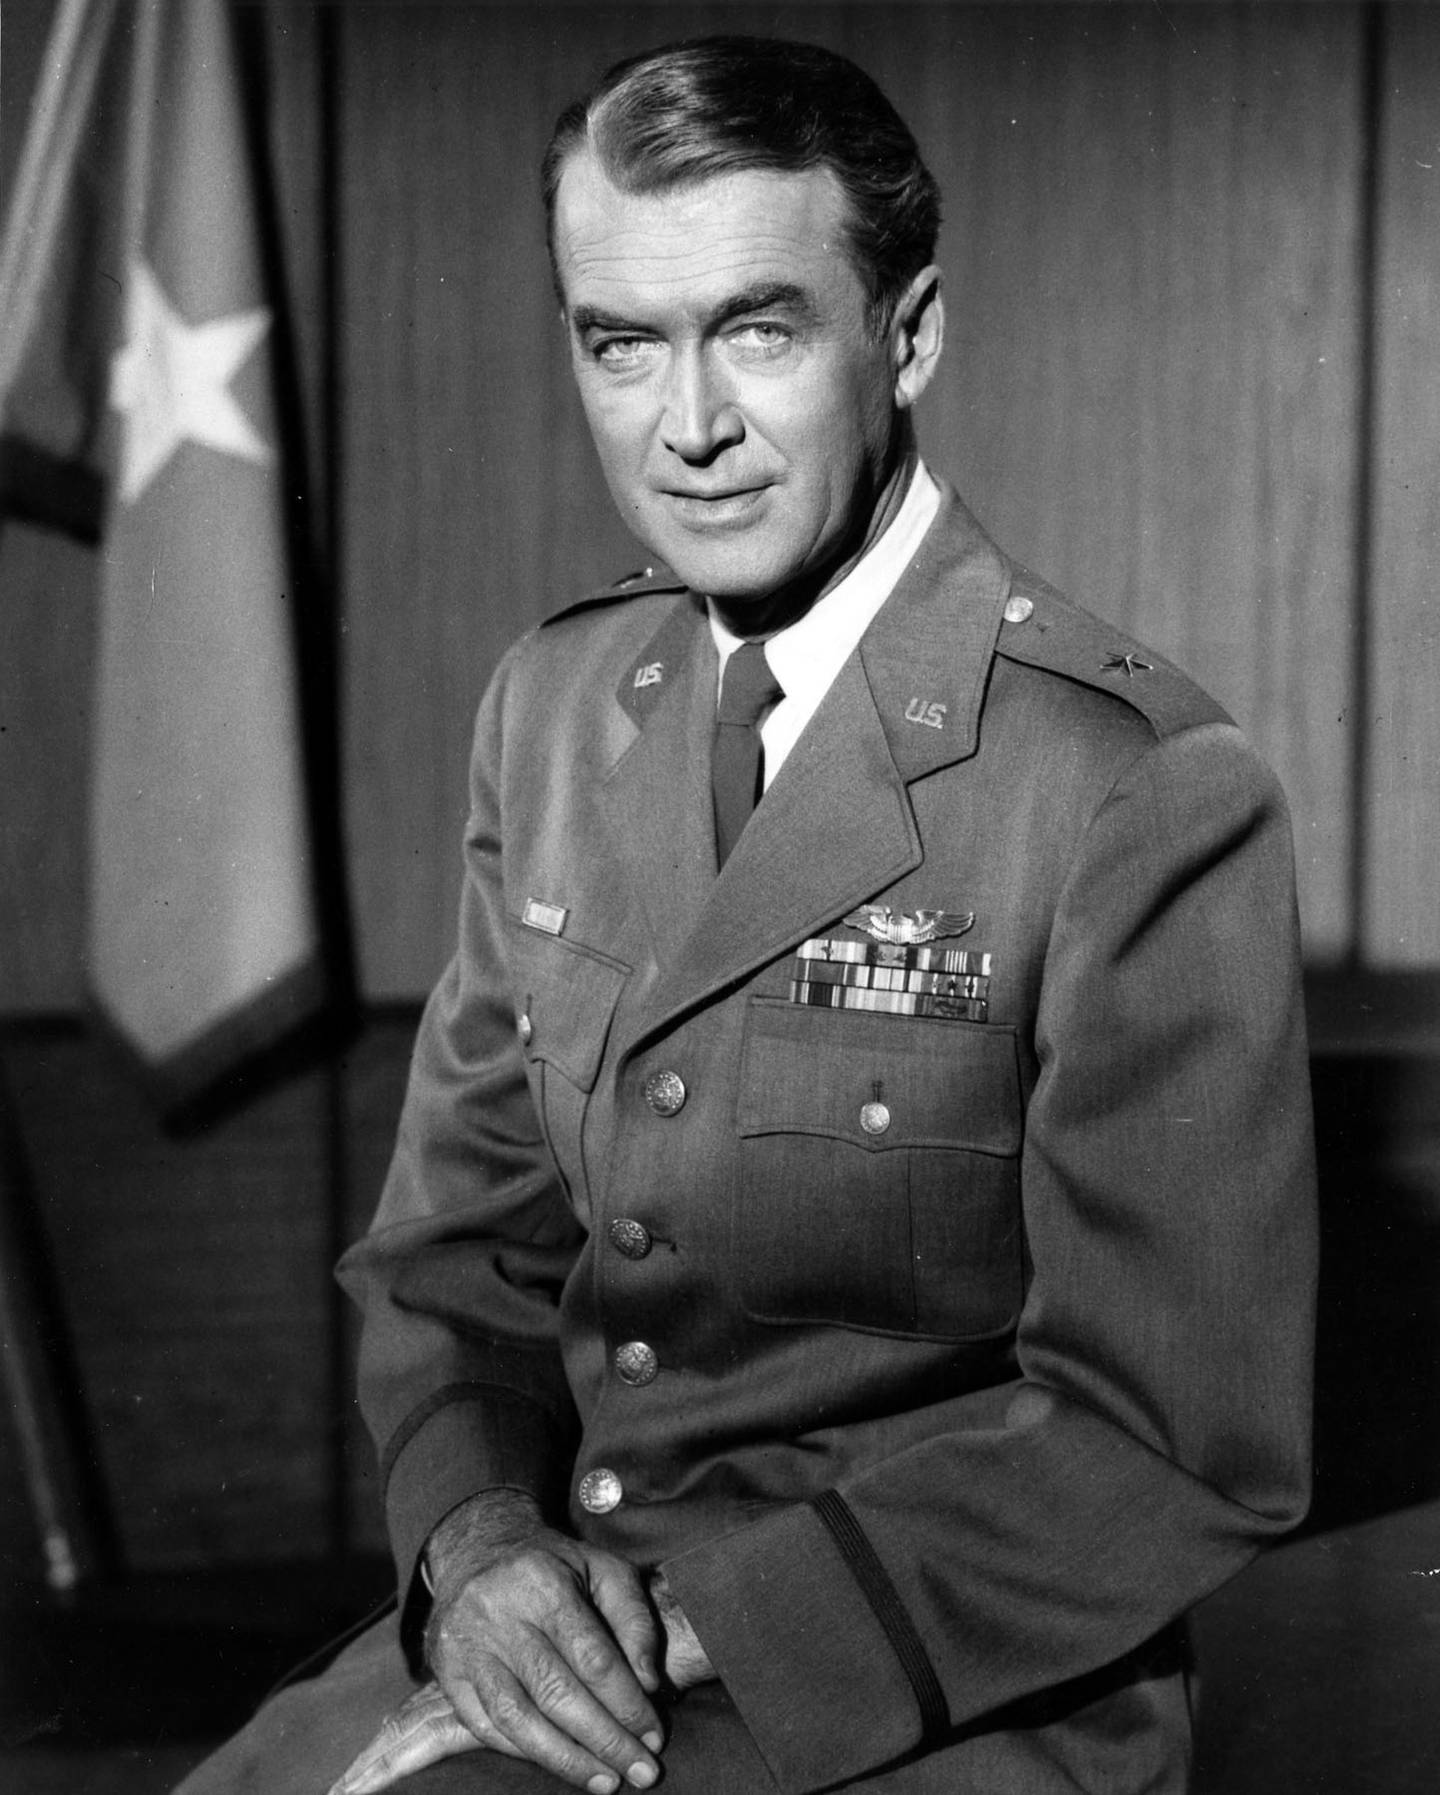 Oscar-winning actor James Stewart remains the highest-ranking actor in military history, achieving the rank of Brigadier General. Photo: US Air Force